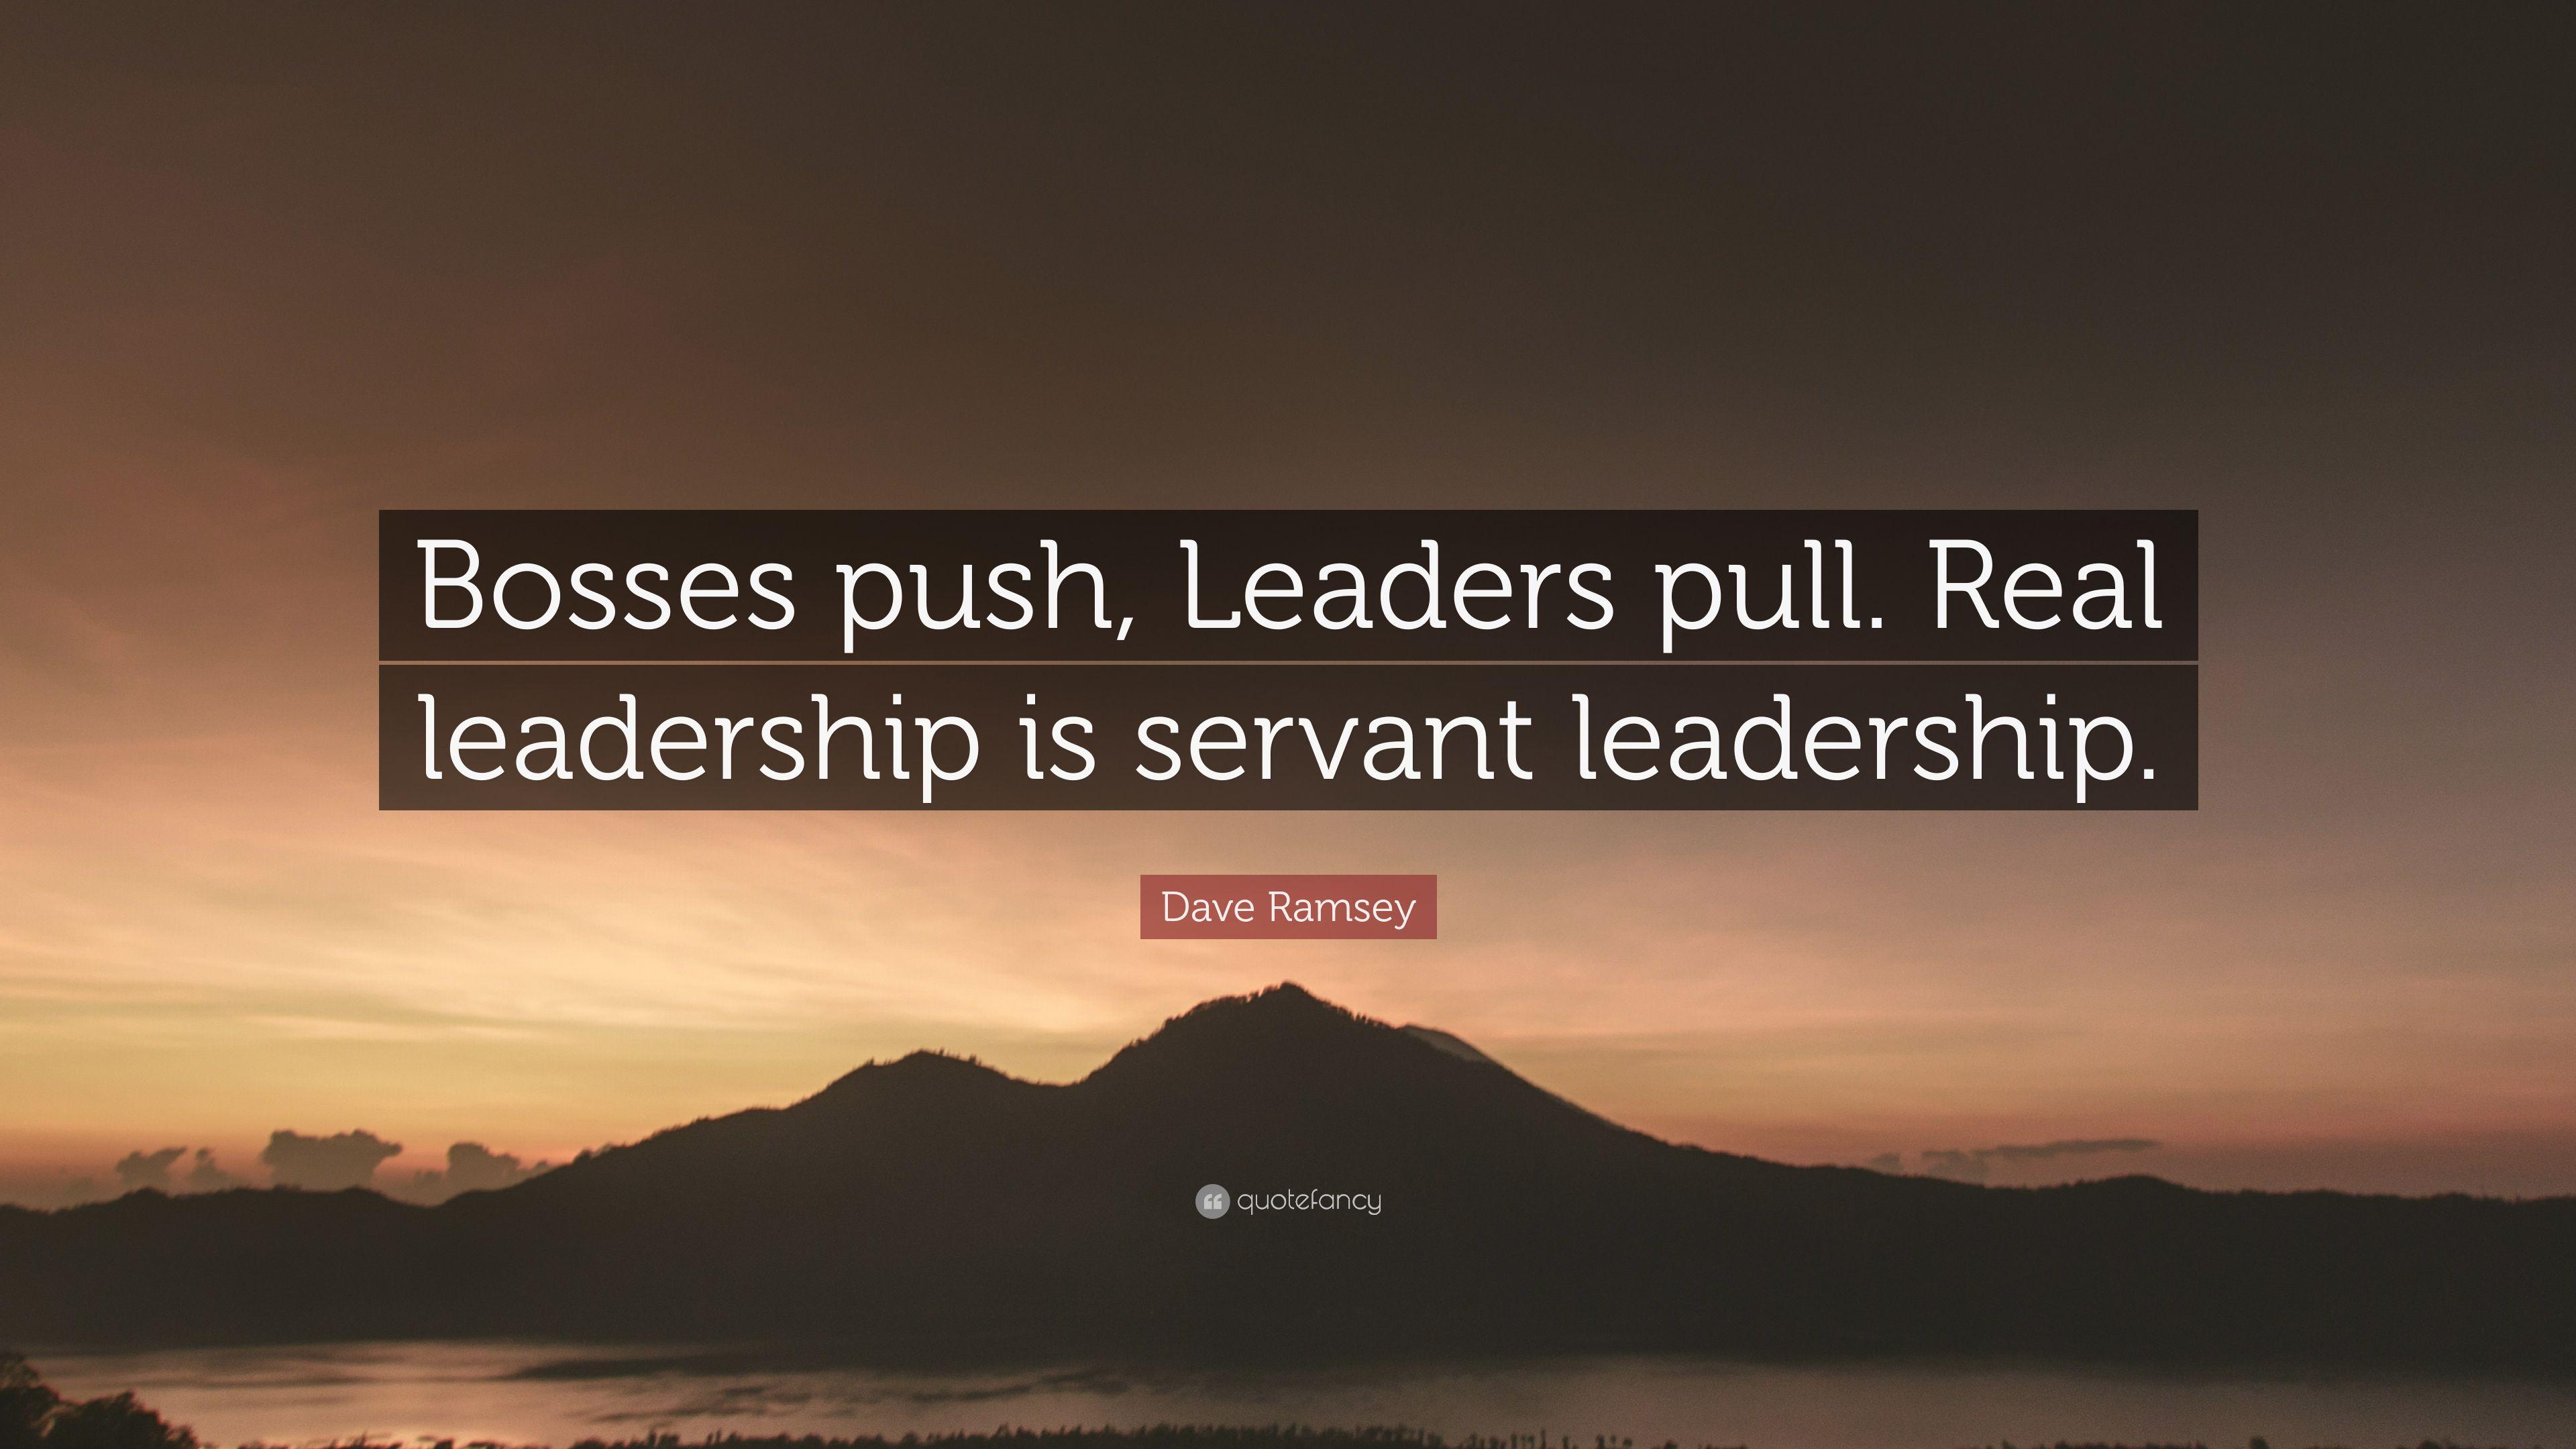 Dave Ramsey Quote: “Bosses push, Leaders pull. Real leadership is